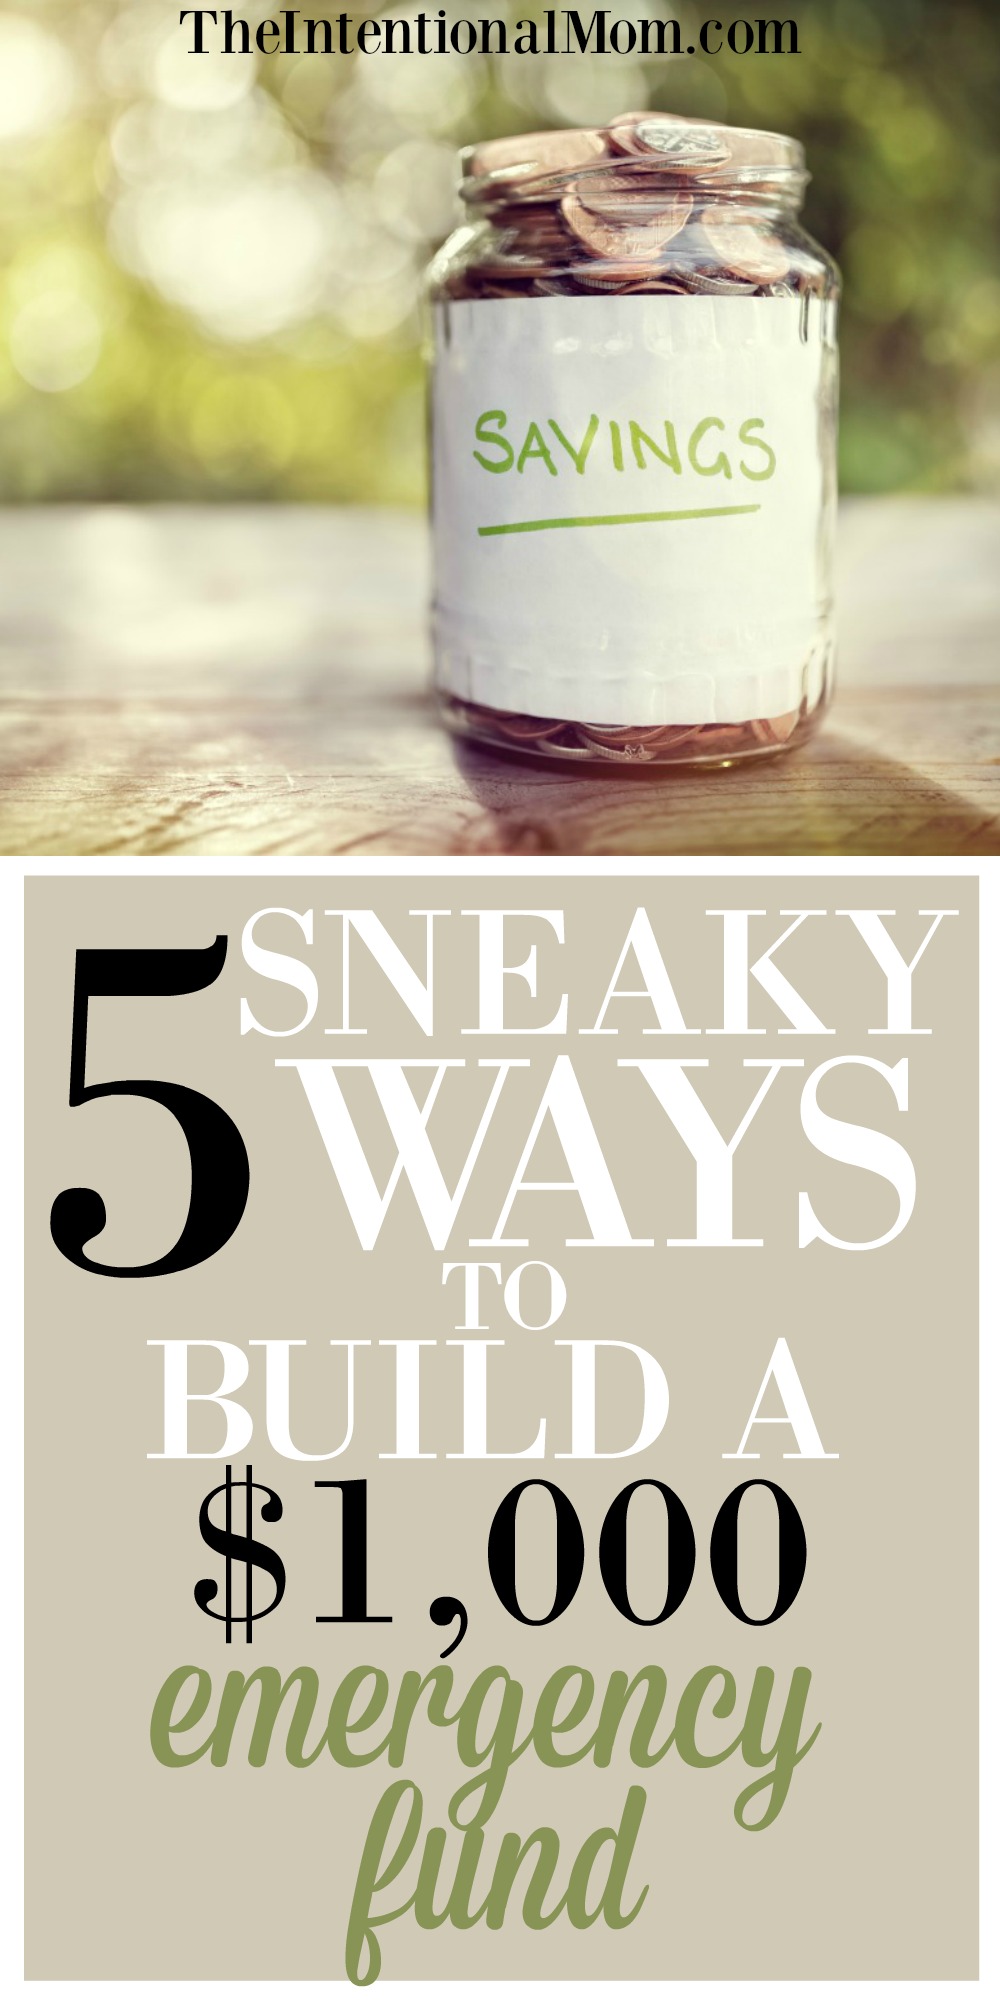 5 Sneaky Ways to Build a $1,000 Emergency Fund – STAT!